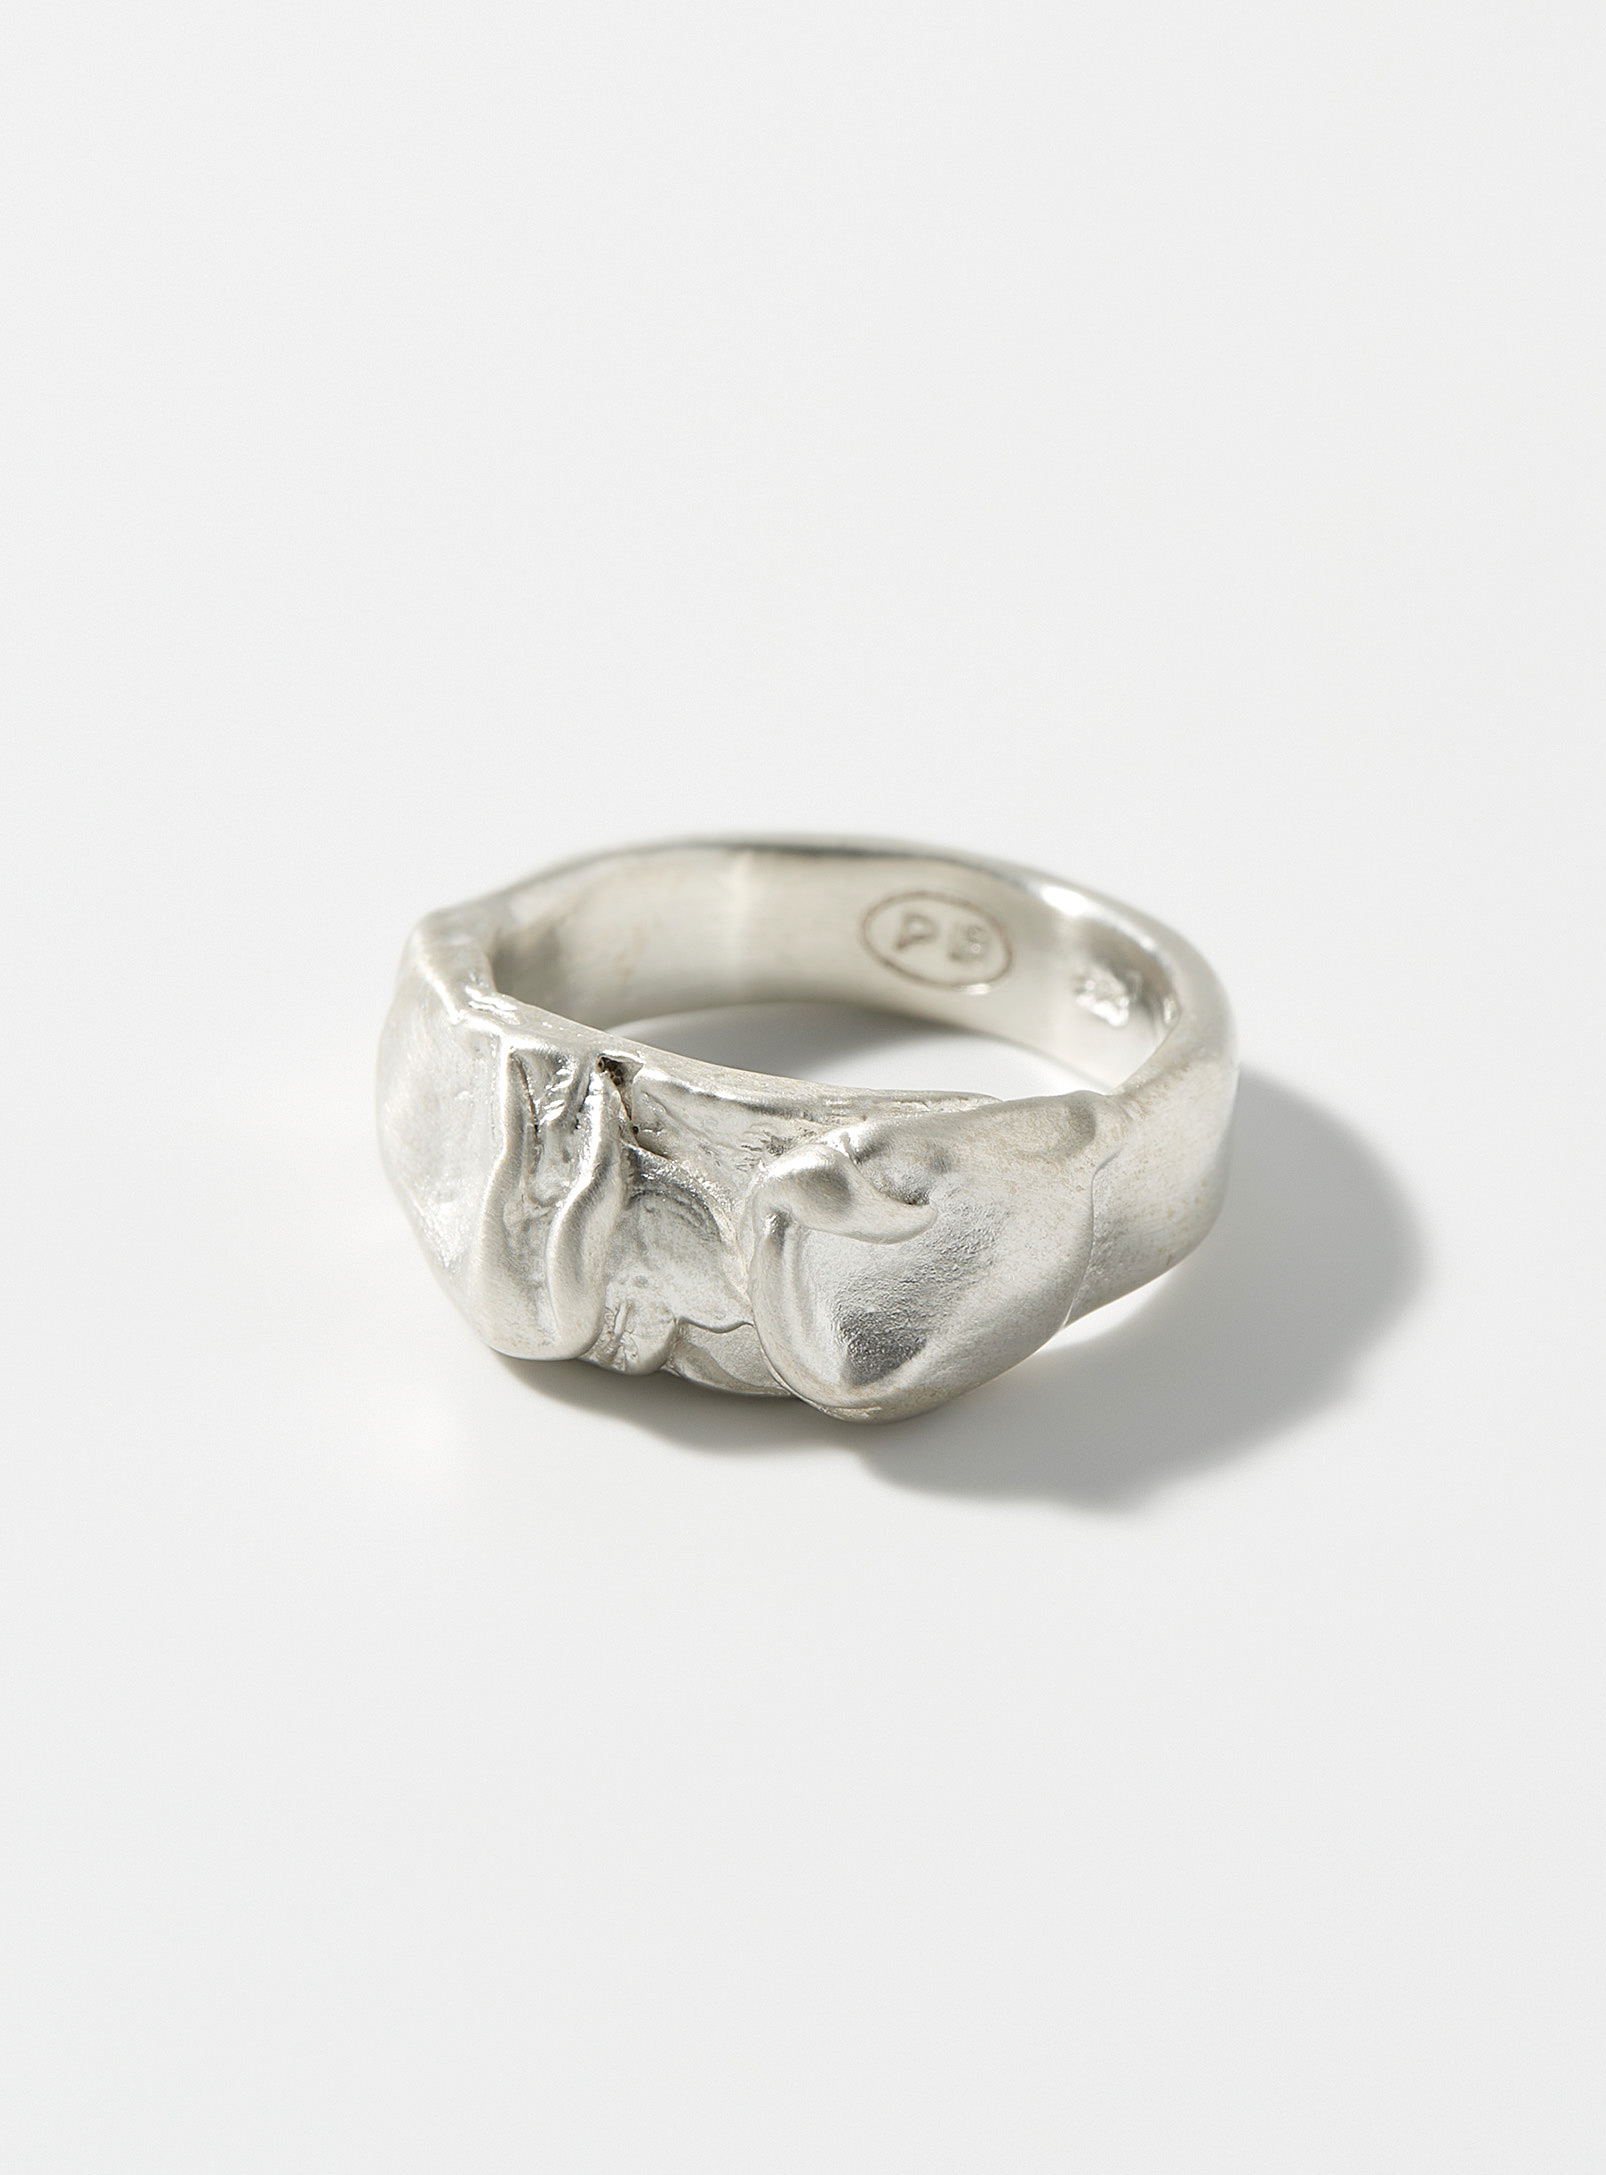 Paul Edward - Men's Melted sterling silver ring